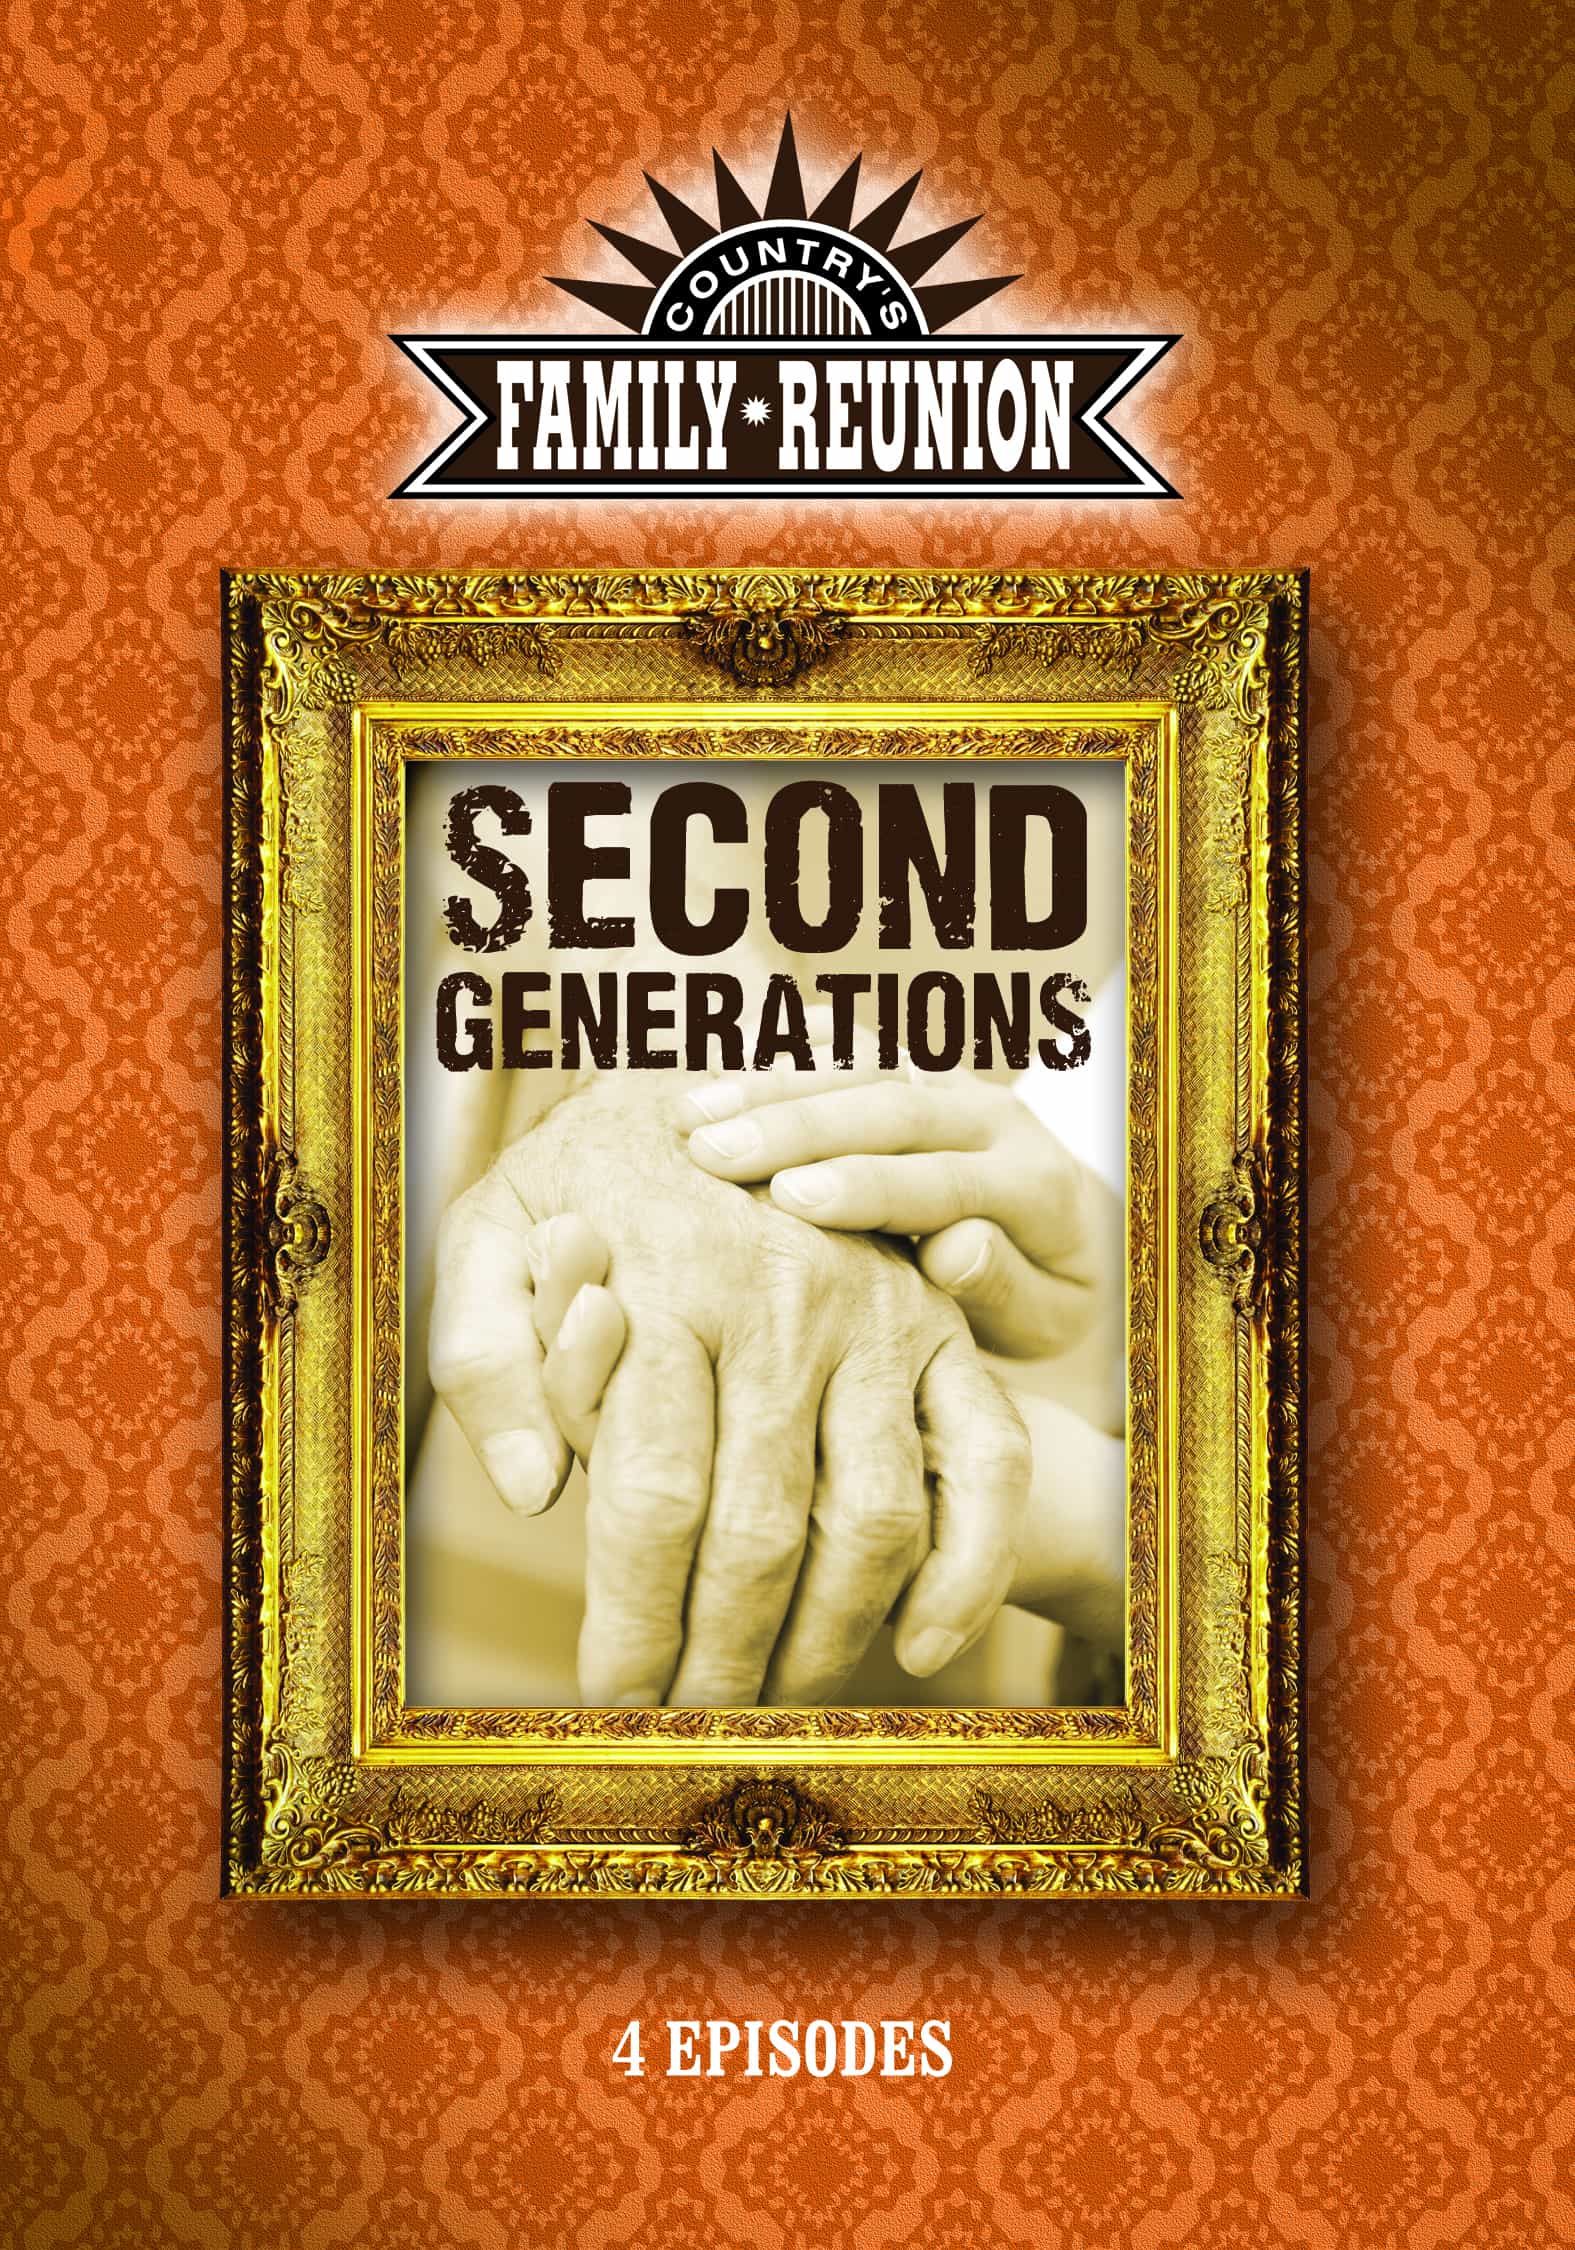 Country's Family Reunion Second Generations - Country Road TV